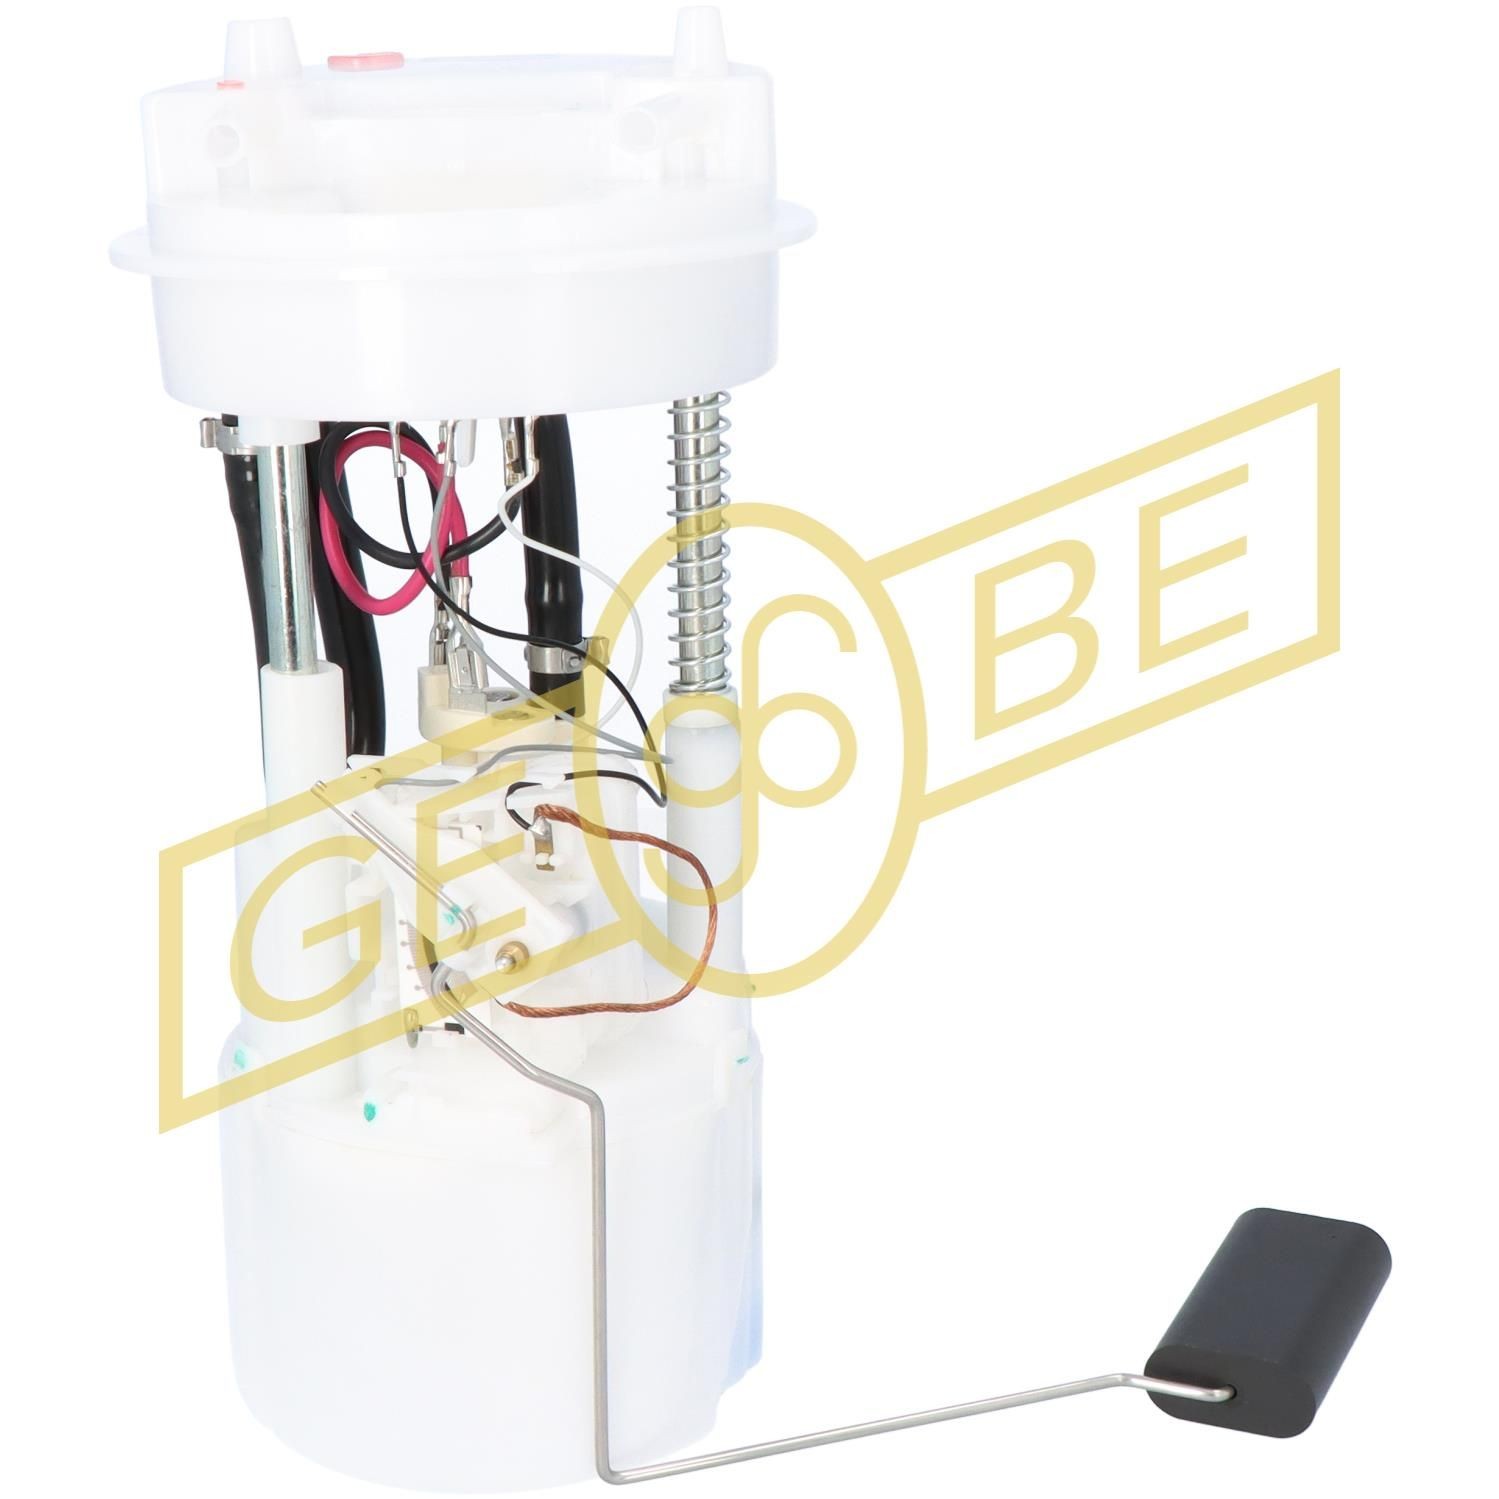 Fuel supply module GEBE Electric - 9 6048 1